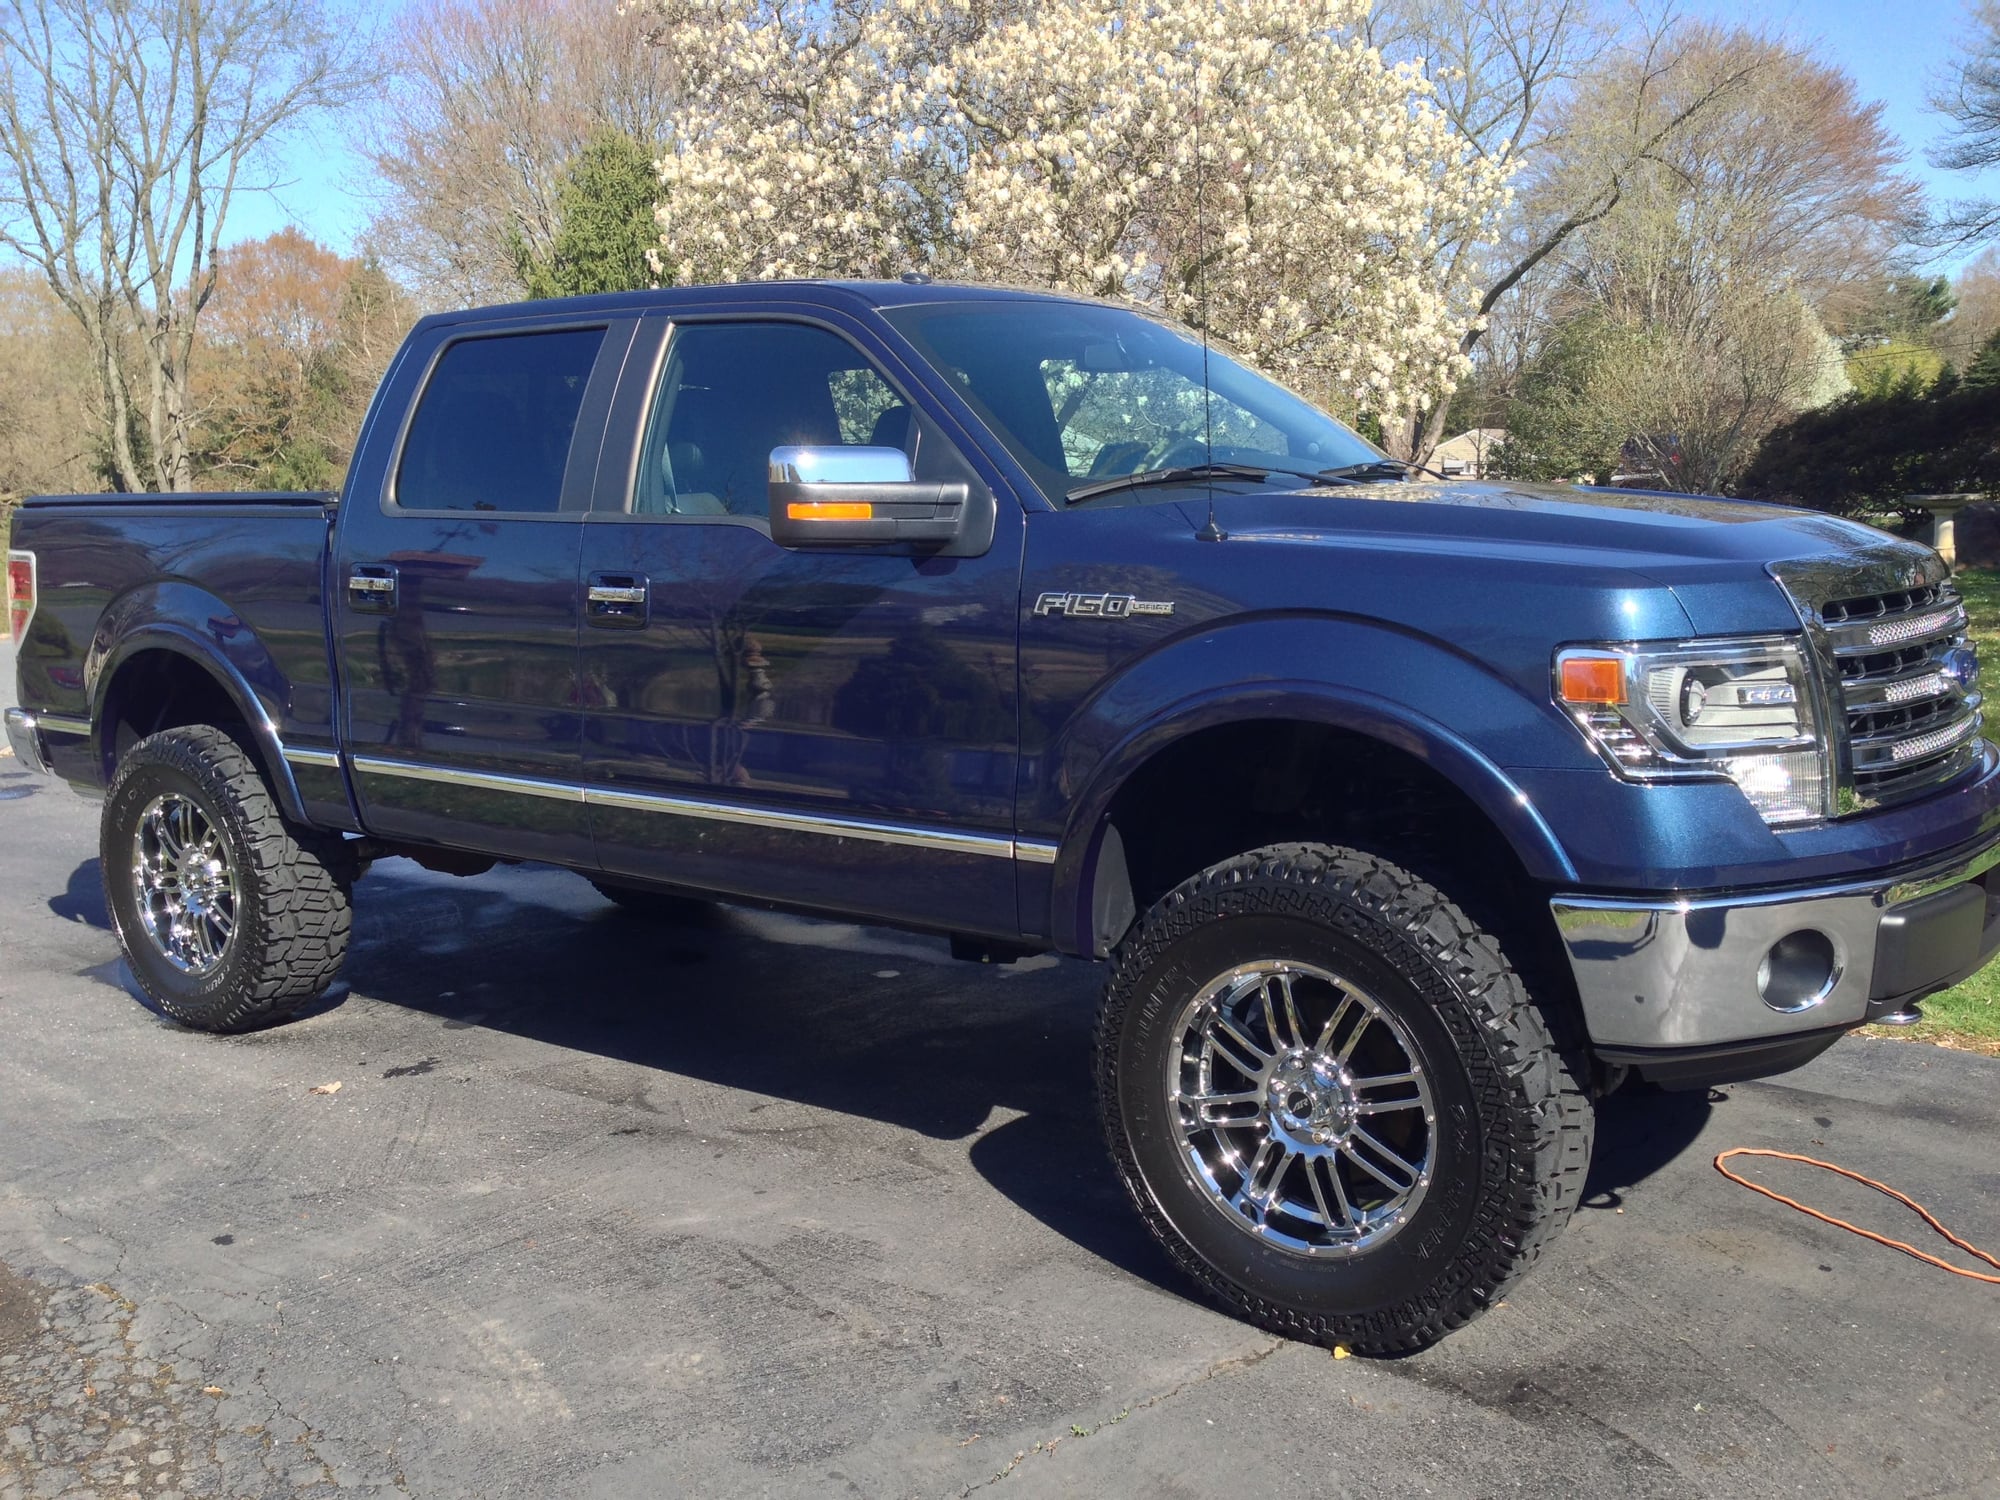 4 and 6 inch lift kit - Page 6 - Ford F150 Forum - Community of Ford Truck Fans Best Tire Size For 4 Inch Lift F150